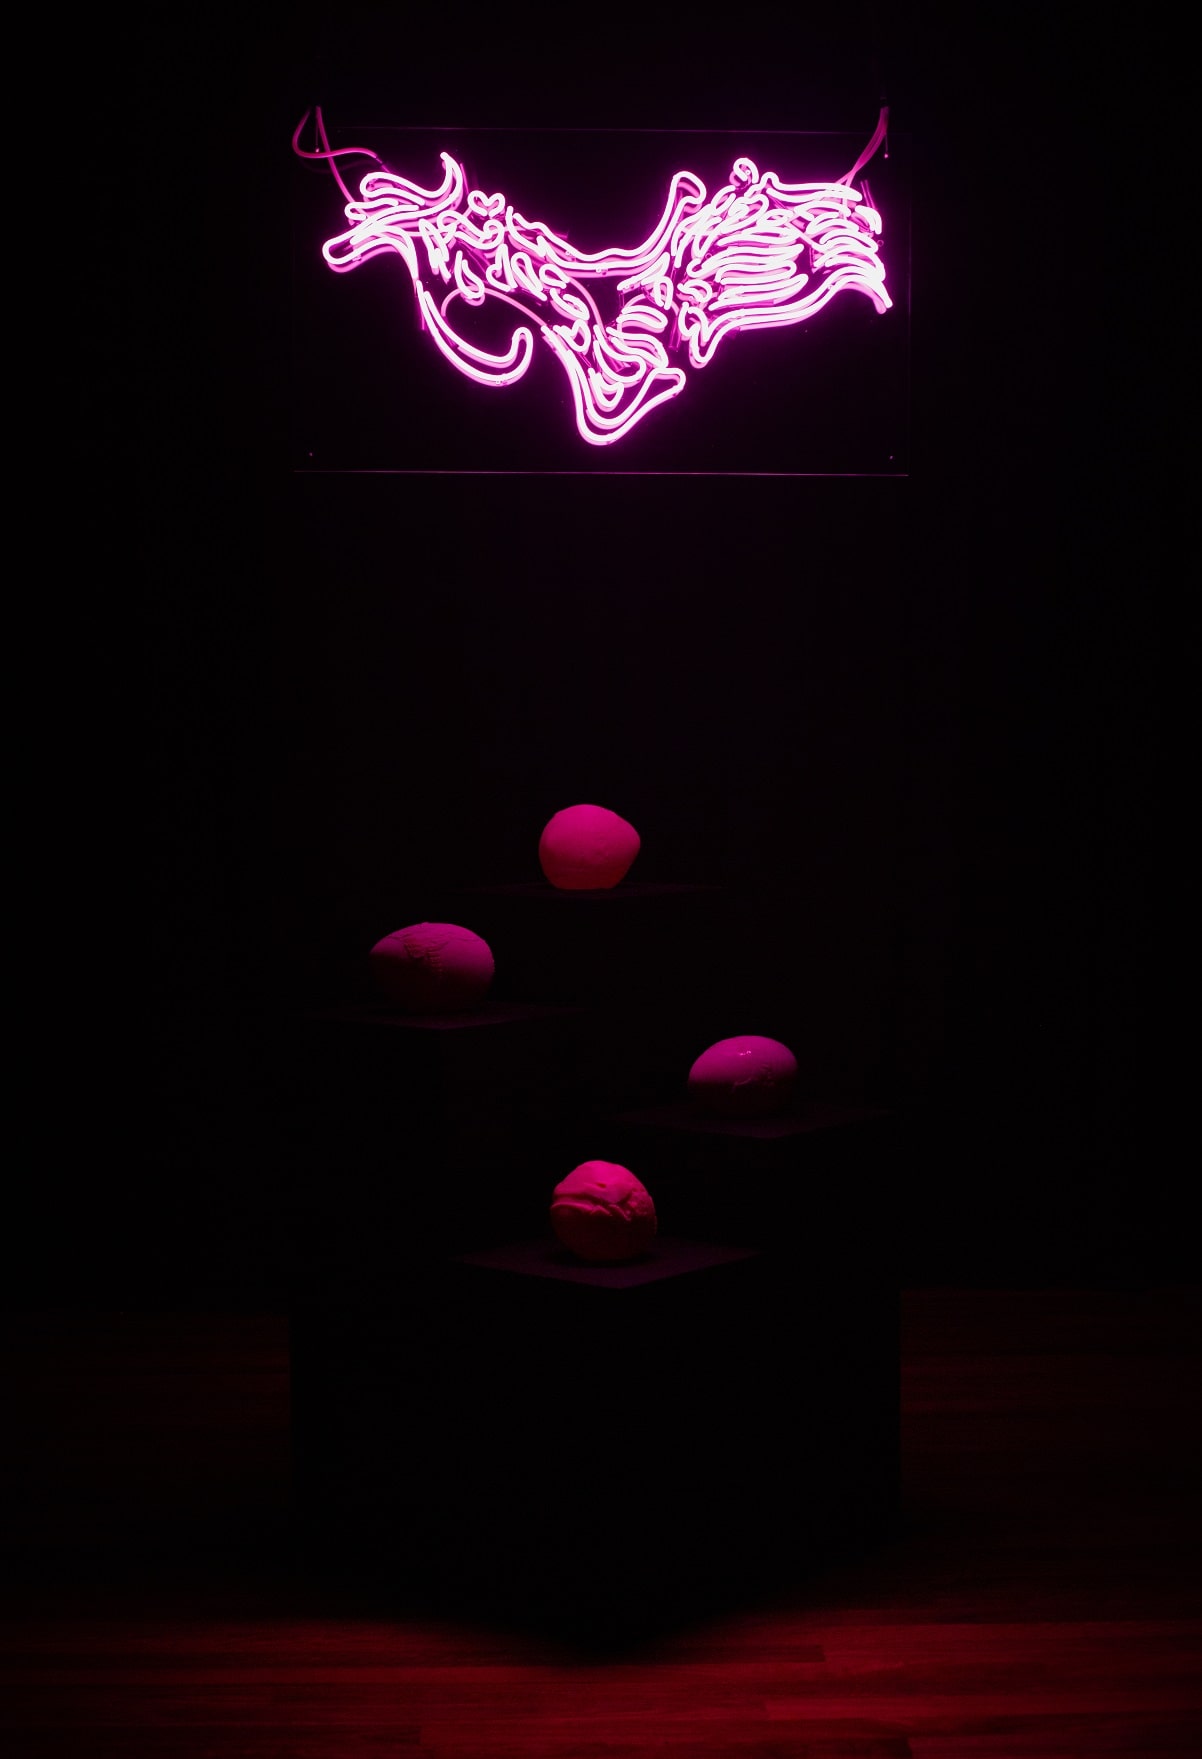 A darkly lit room, with woodeen floor boards and black curtains with four black plinths of different heights centered in the middle with four different bright pink blobs centered on each plinth. Centered above hangs a bright pink neon sign with distored Chinese characters which cast a pink glow over the installation and the space around it.